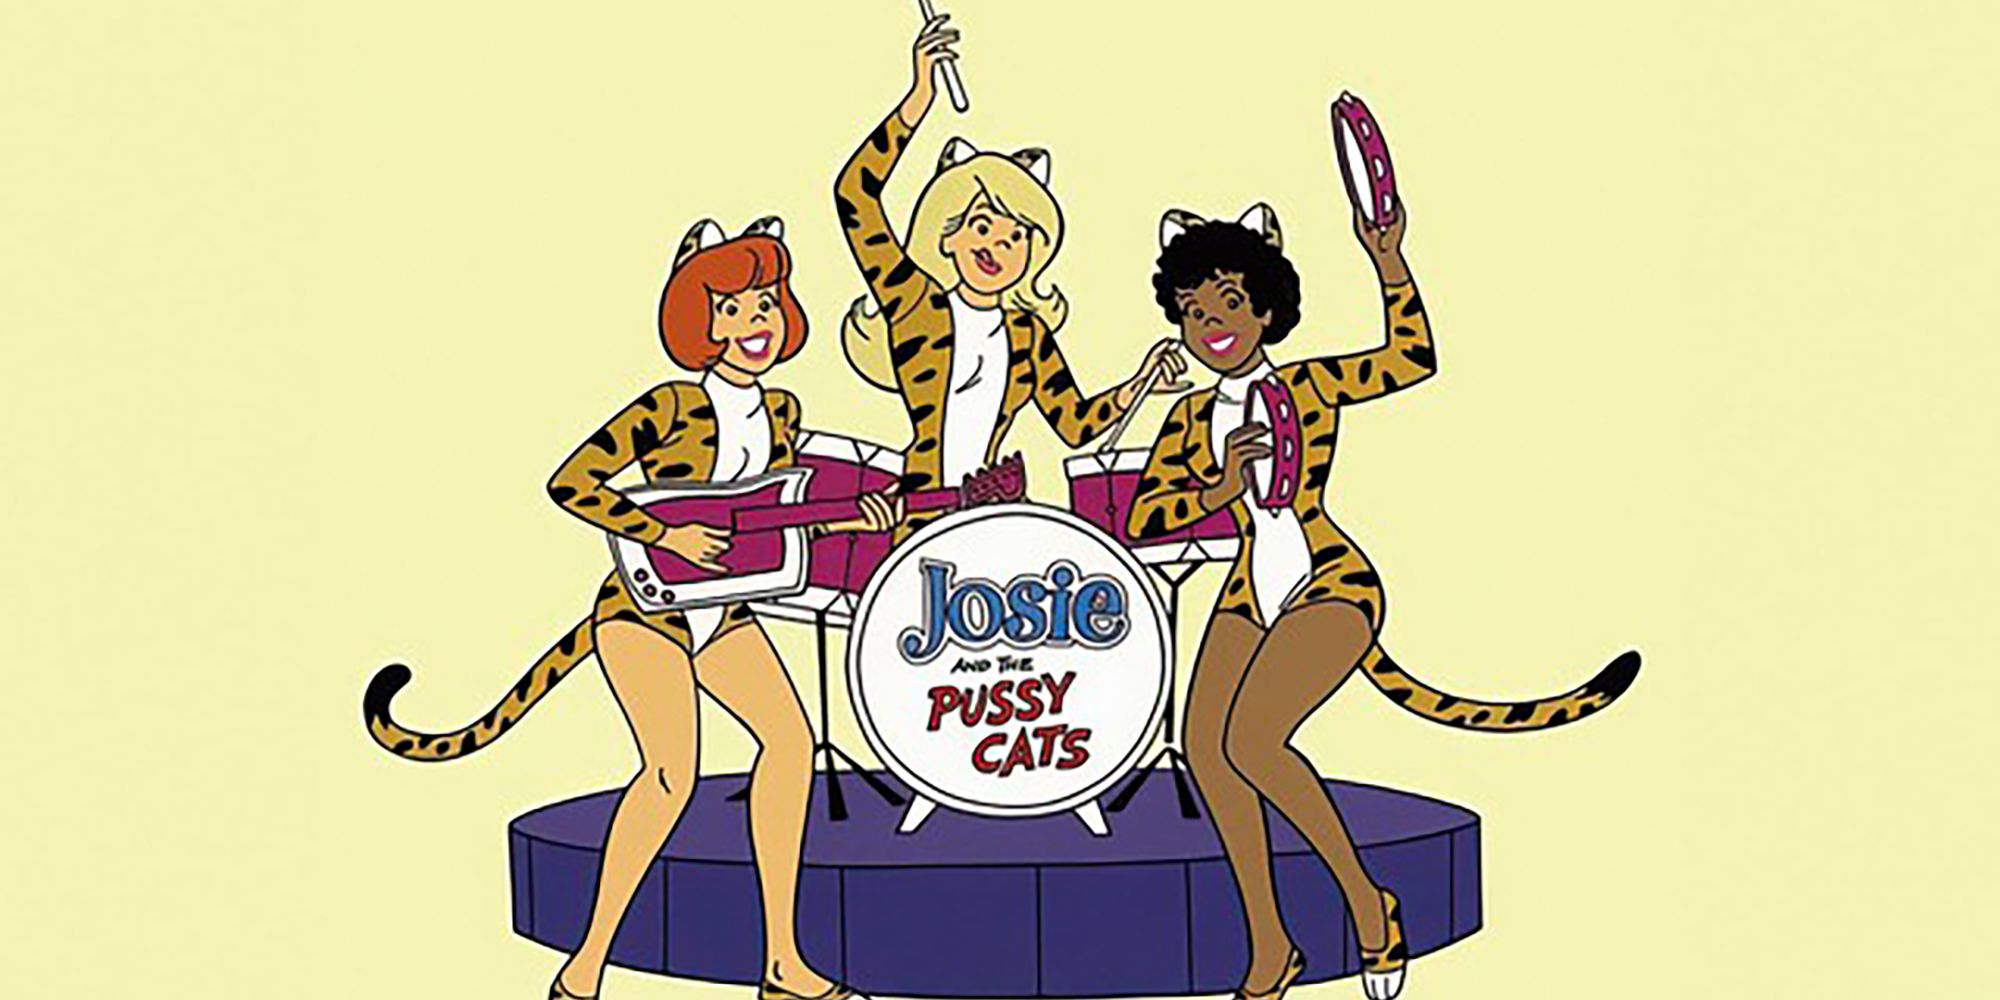 Josie And The Pussycats